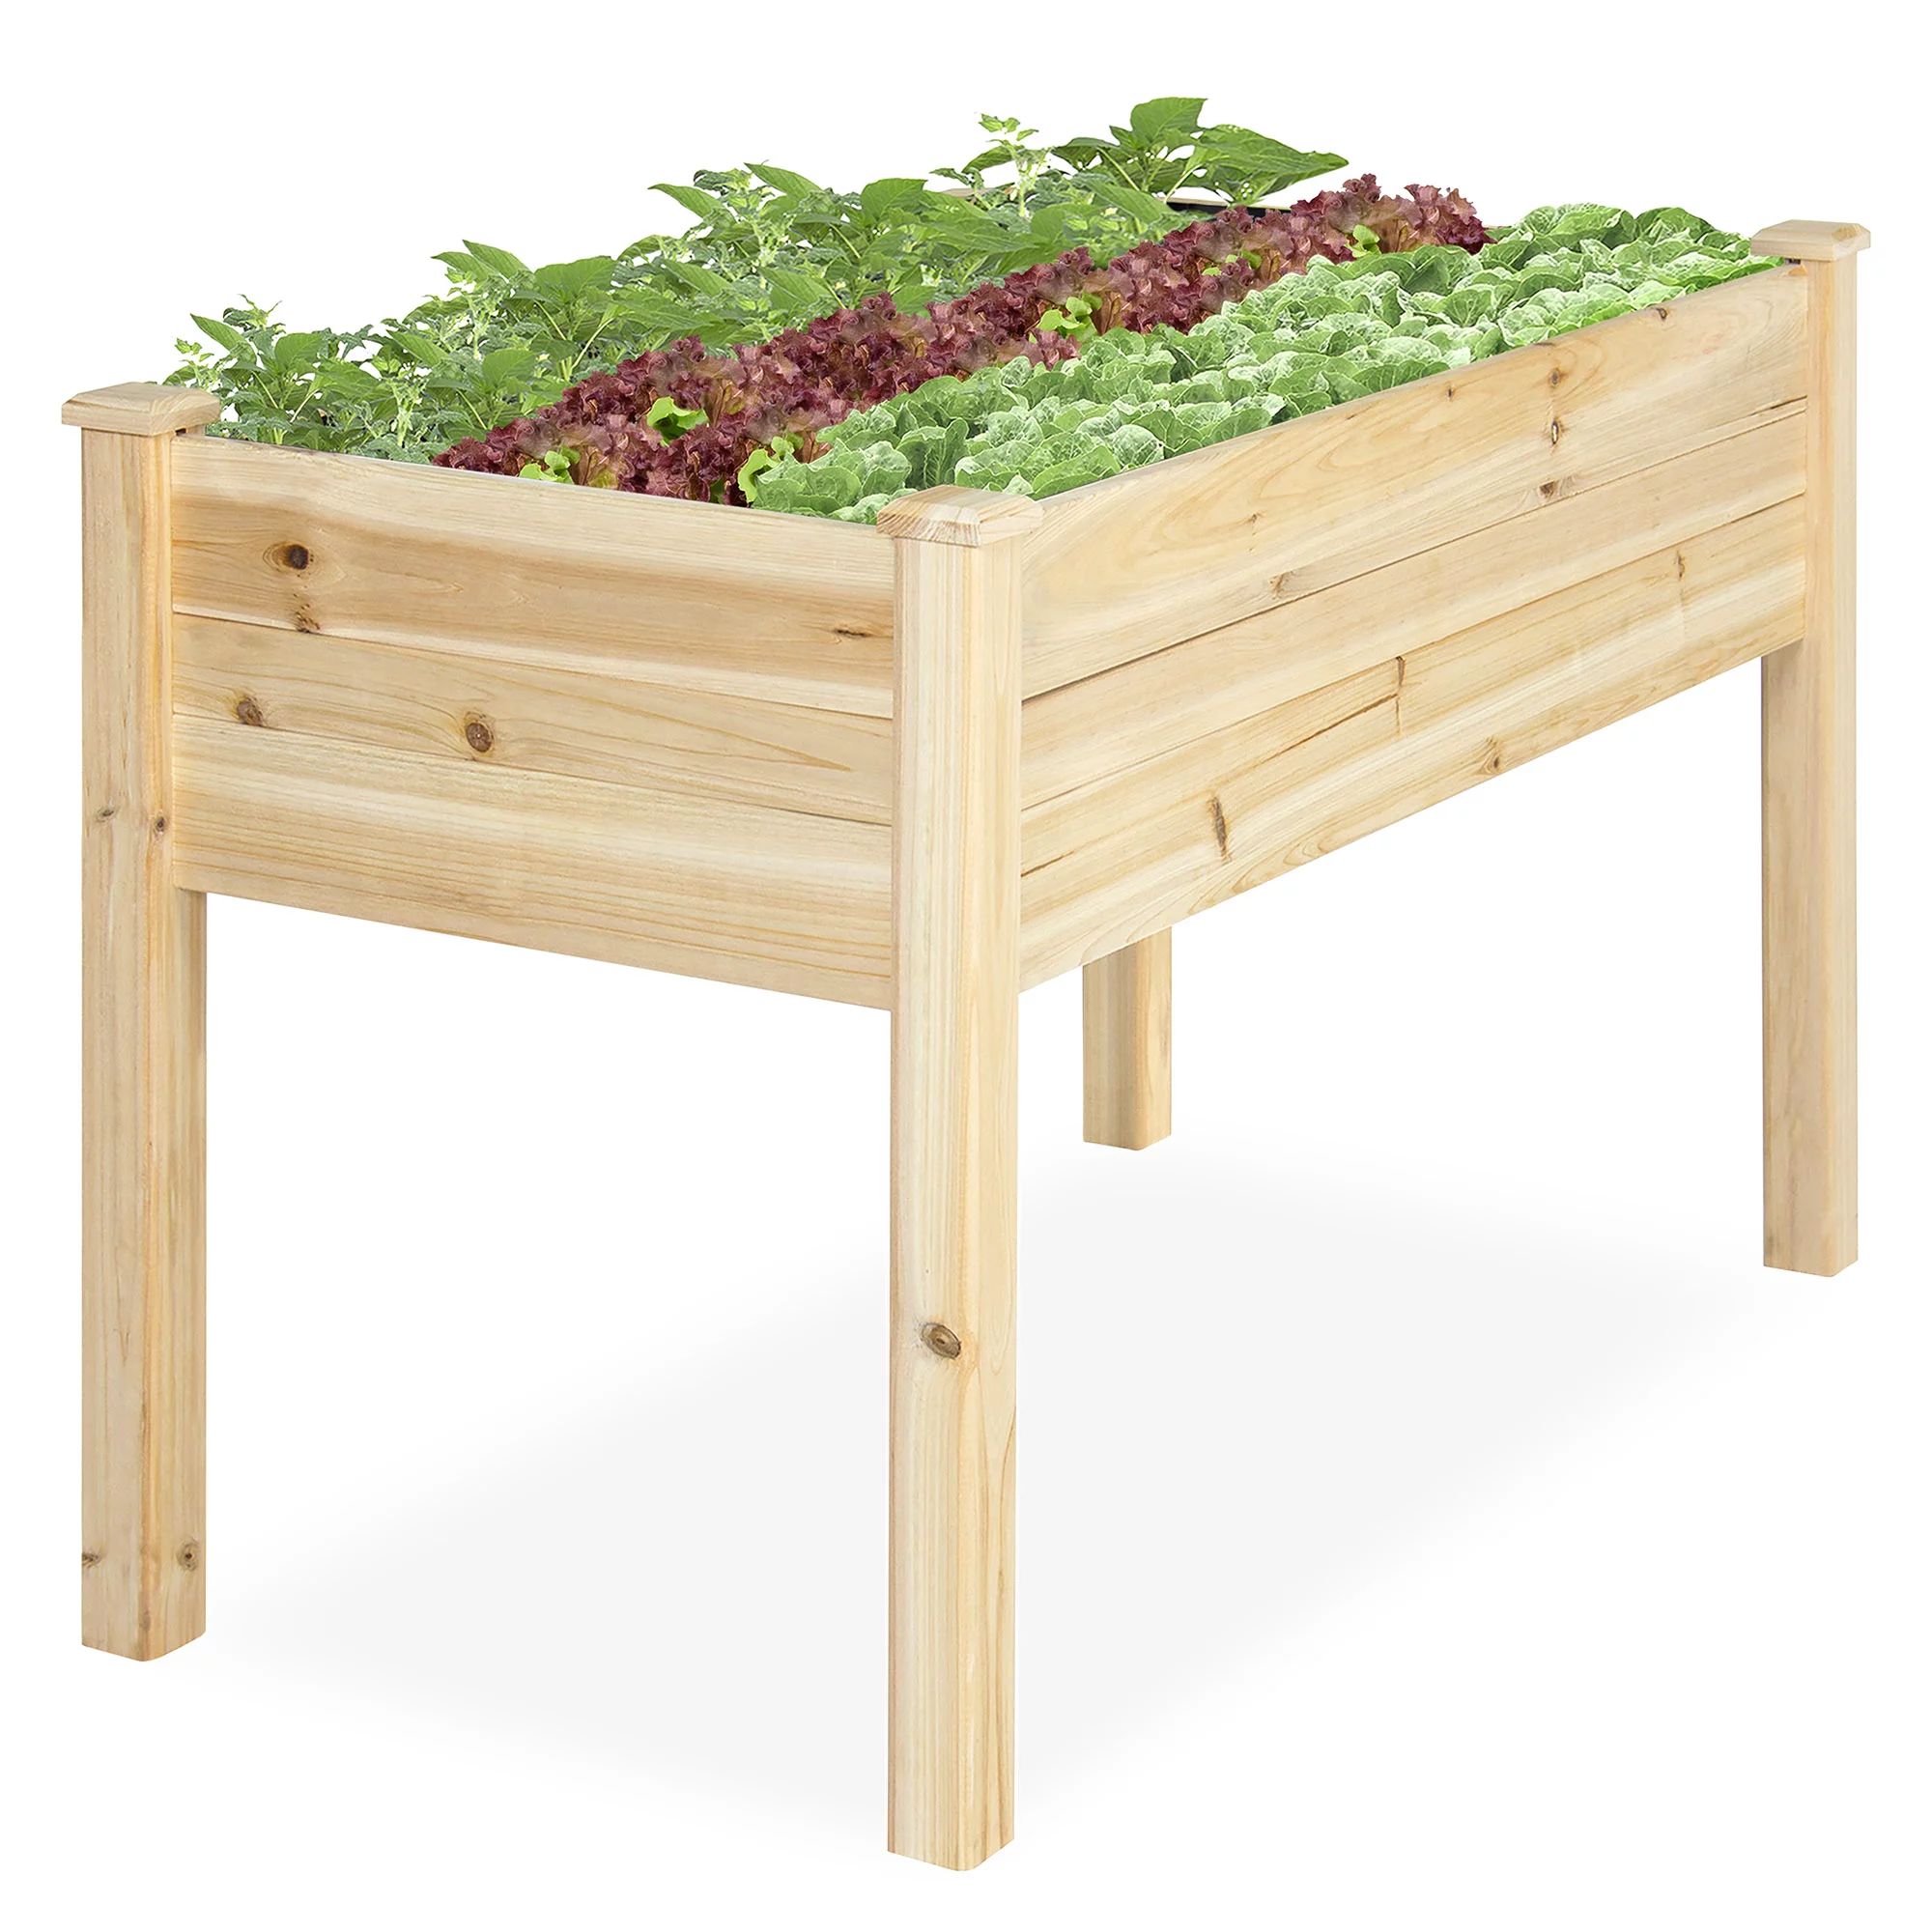 Best Choice Products 48x24x30in Elevated Wood Planter Garden Bed Box Stand for Backyard, Patio - ... | Walmart (US)